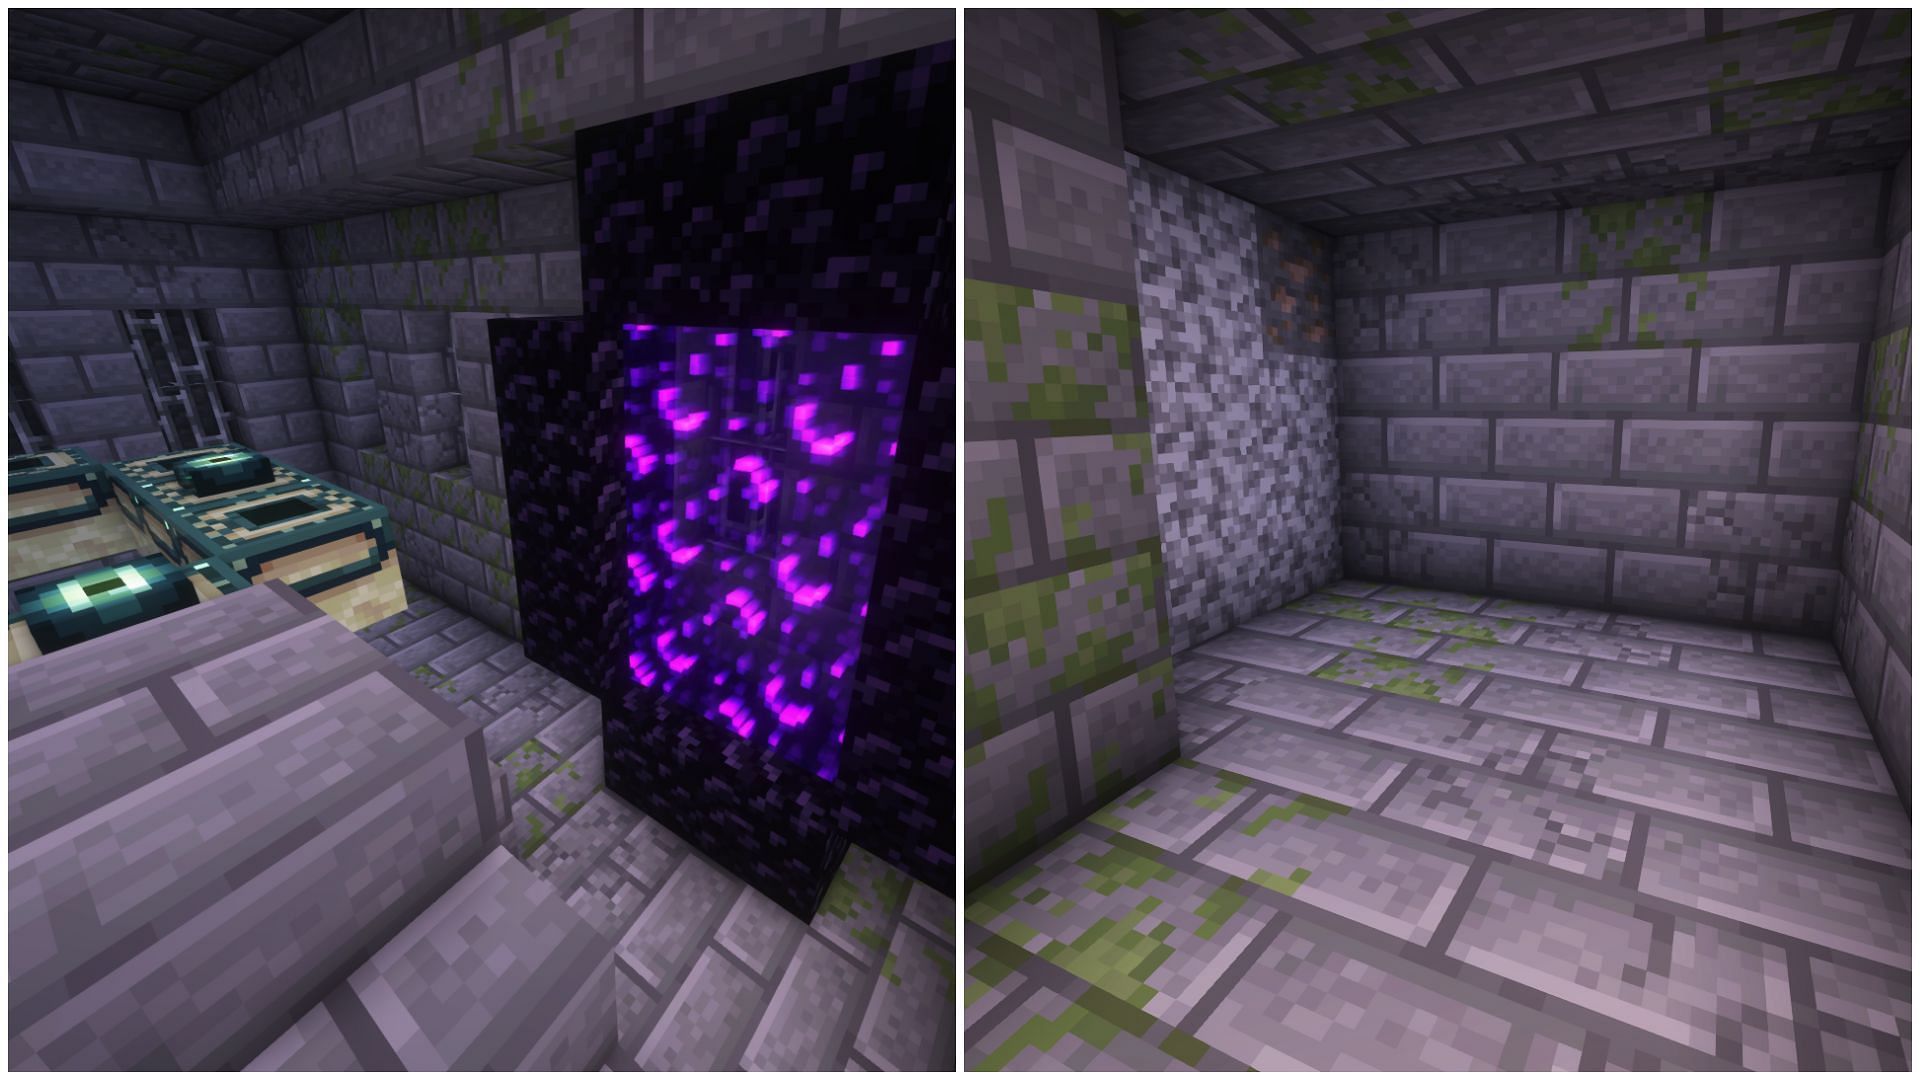 Block off areas to find the end portal room and create a nether portal connection once found. (Image via Mojang)